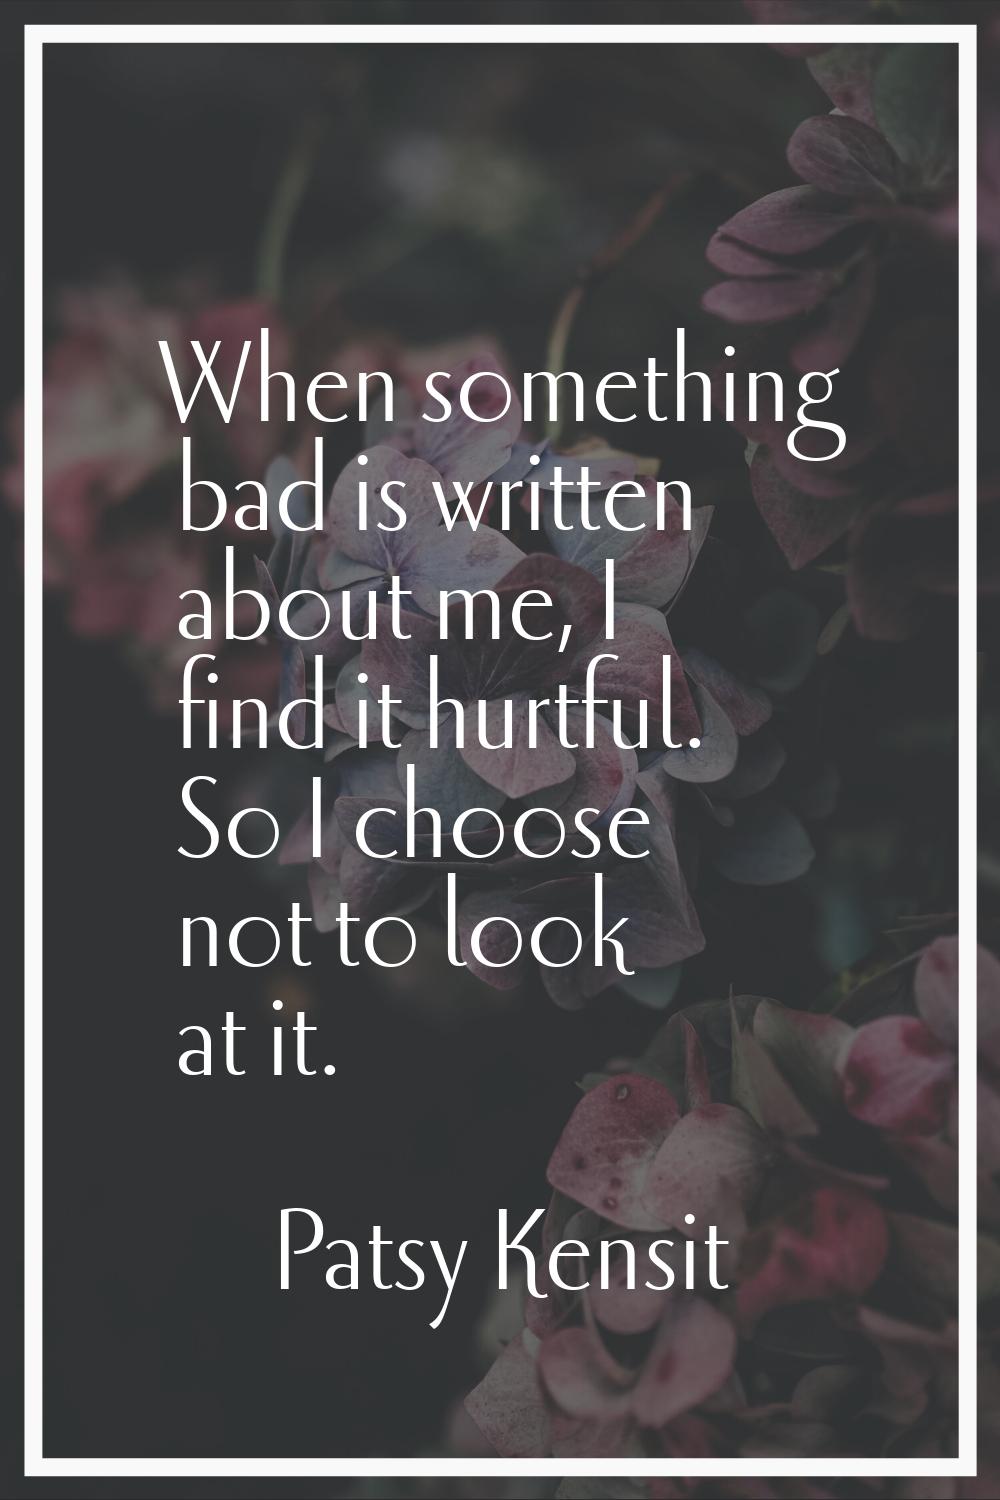 When something bad is written about me, I find it hurtful. So I choose not to look at it.